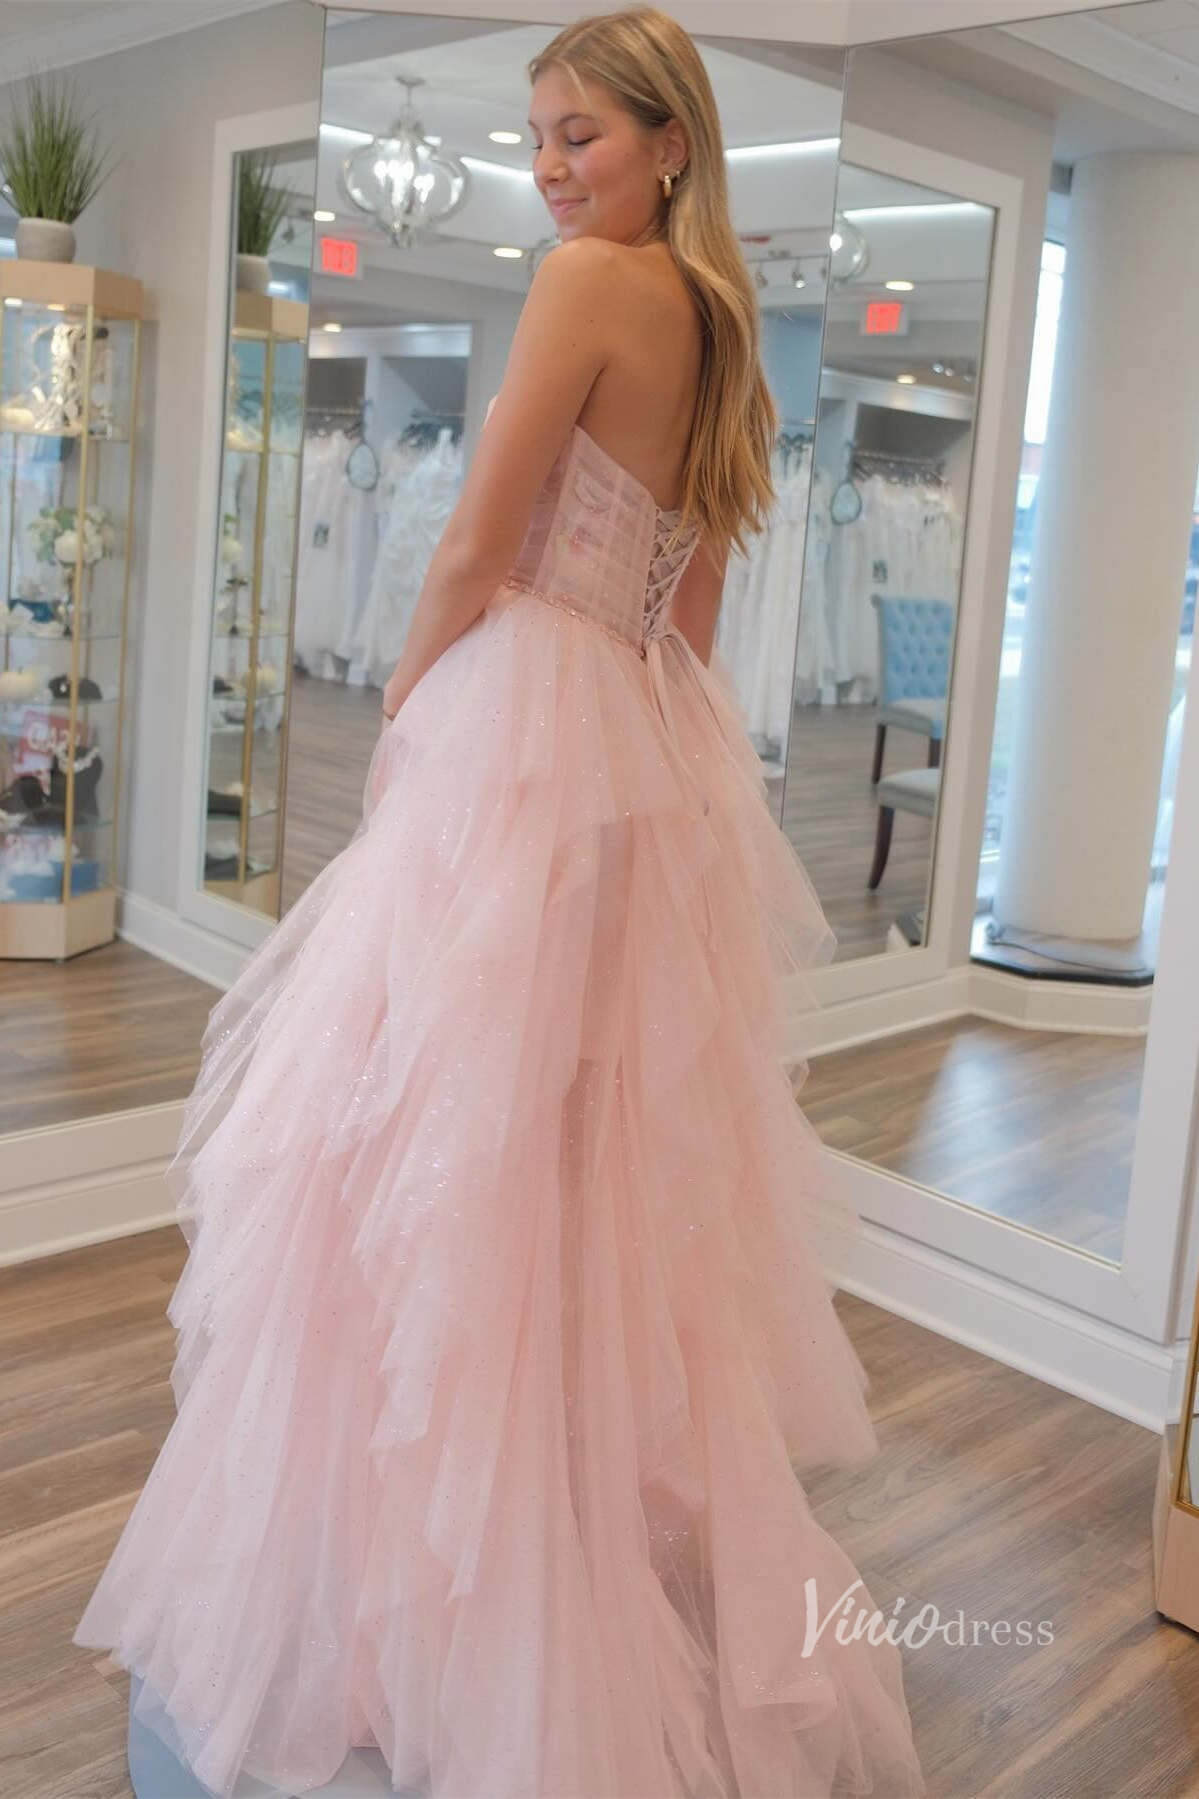 Sparkly Blush Pink Tiered Prom Dresses Strapless Pleated Boned Bodice FD4035